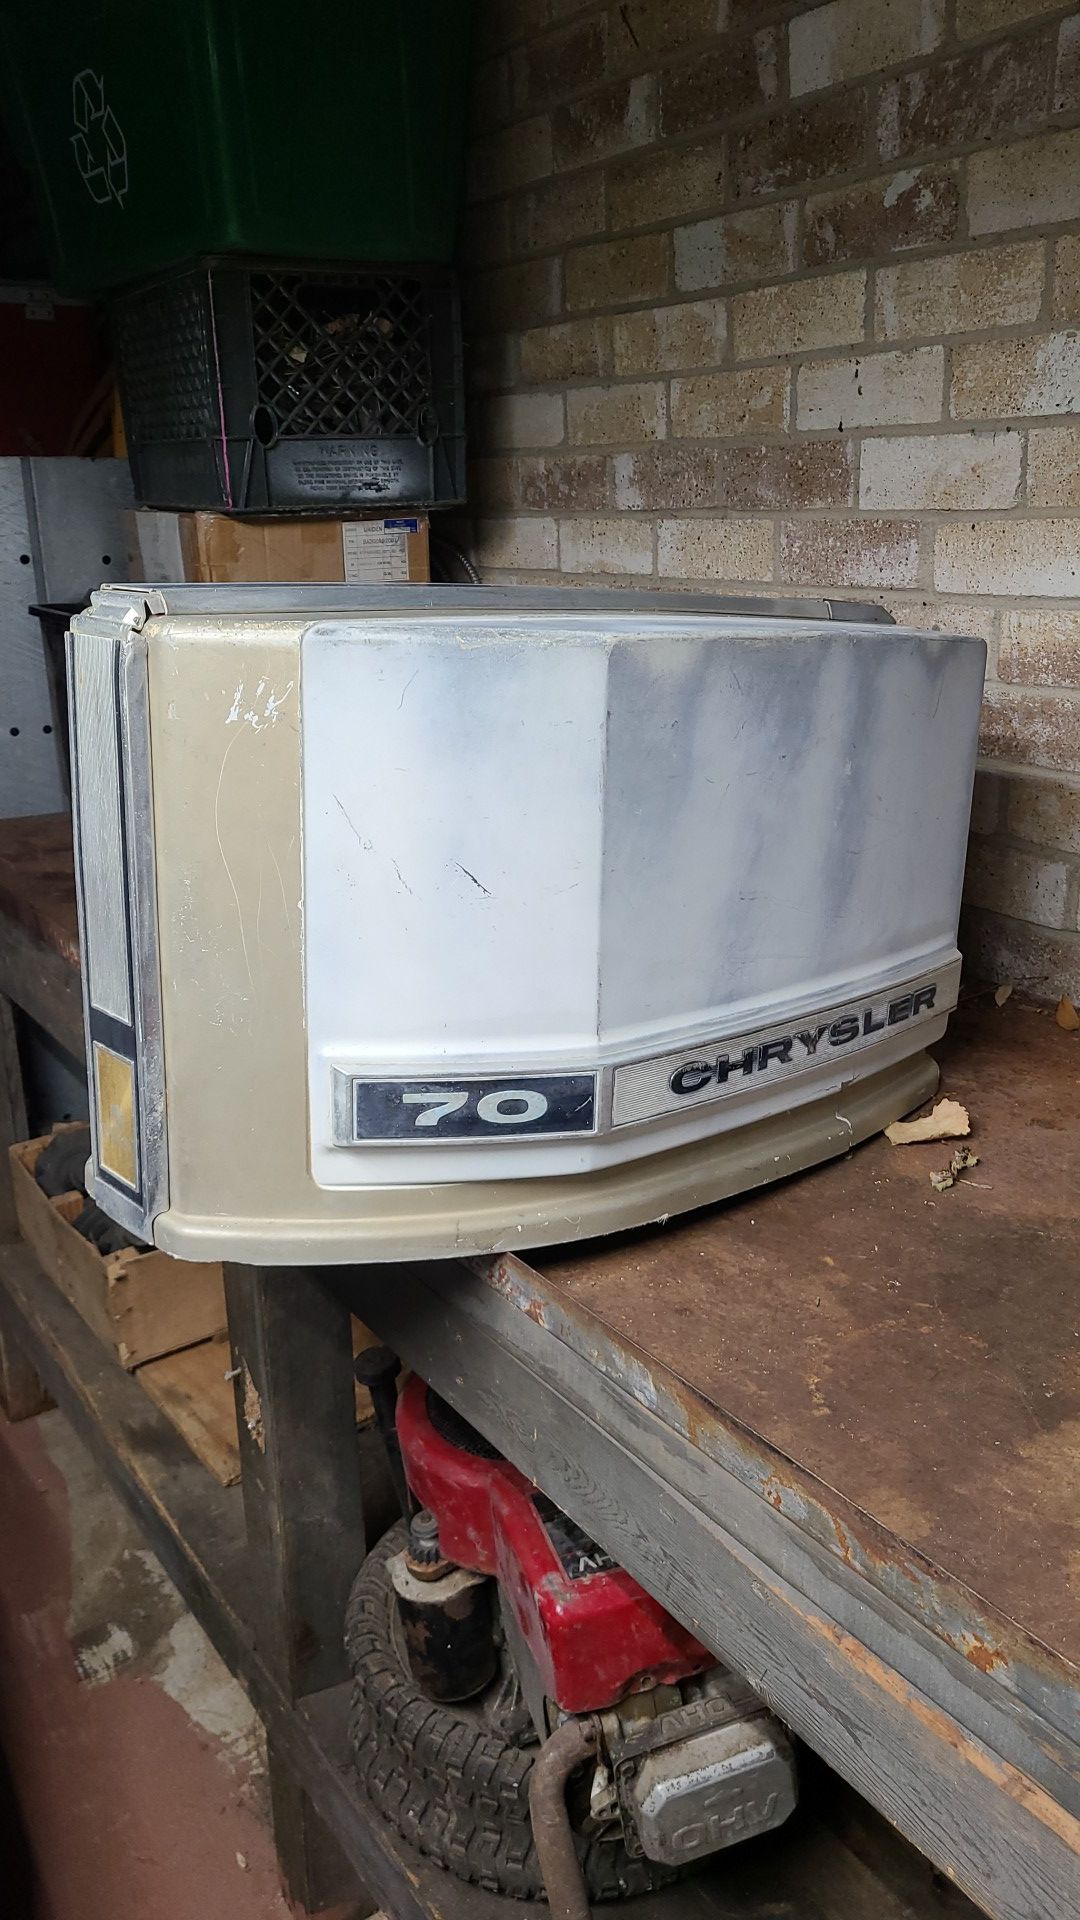 Chrysler 70 outboard engine cover